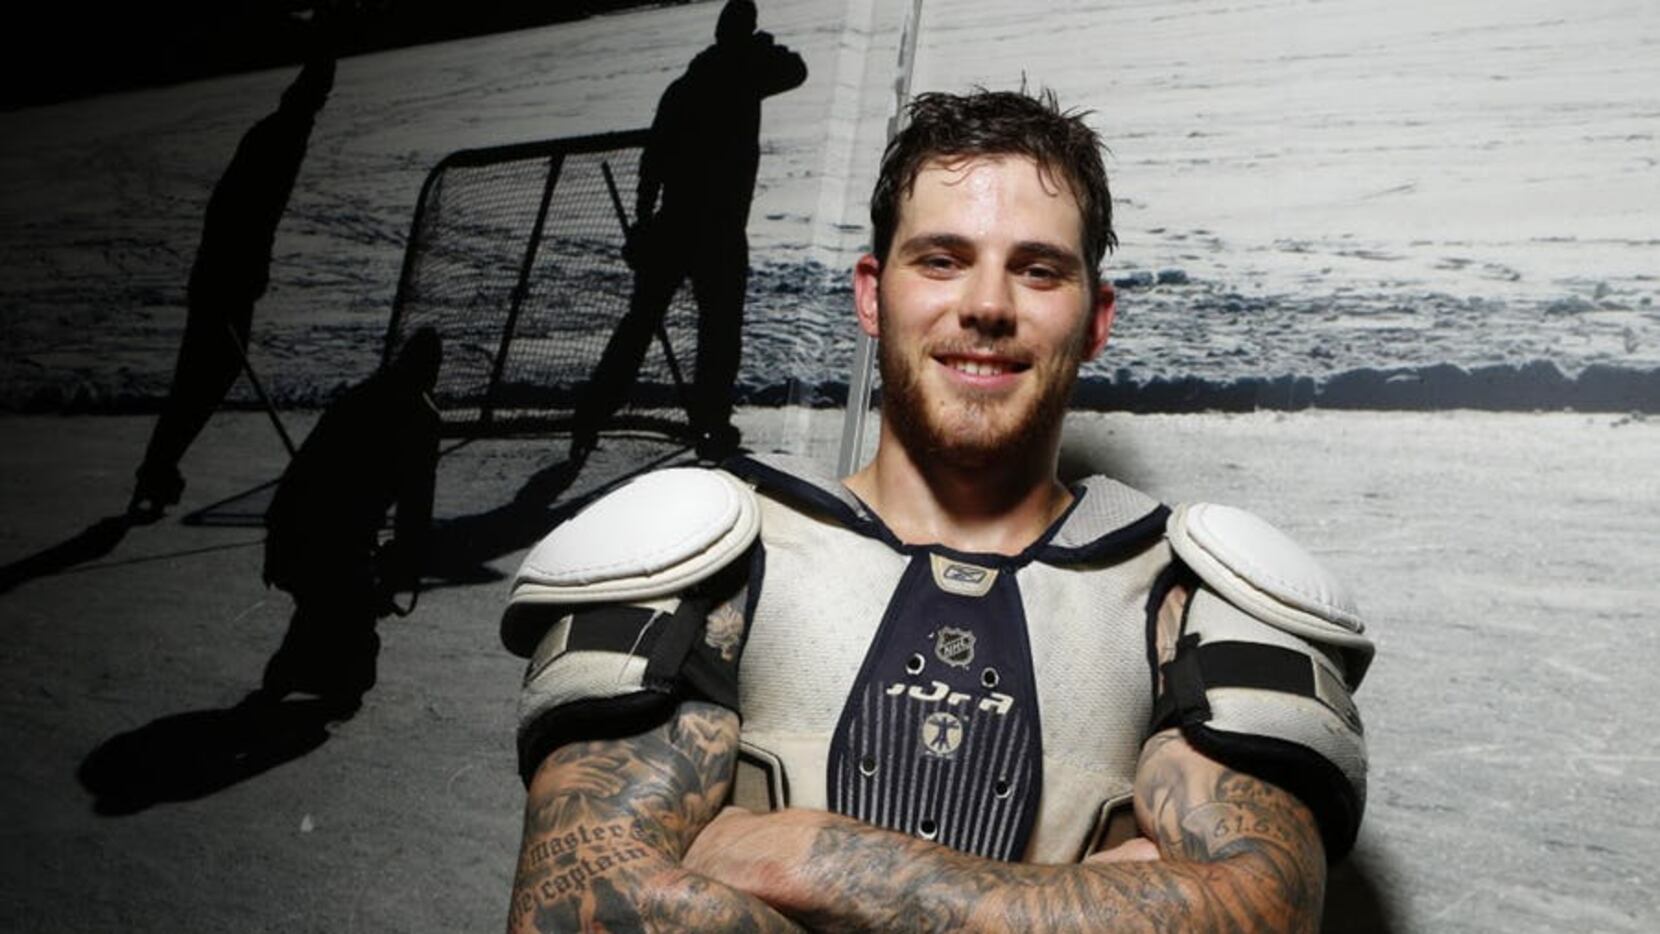 Boston Bruins: What if Tyler Seguin was never traded?